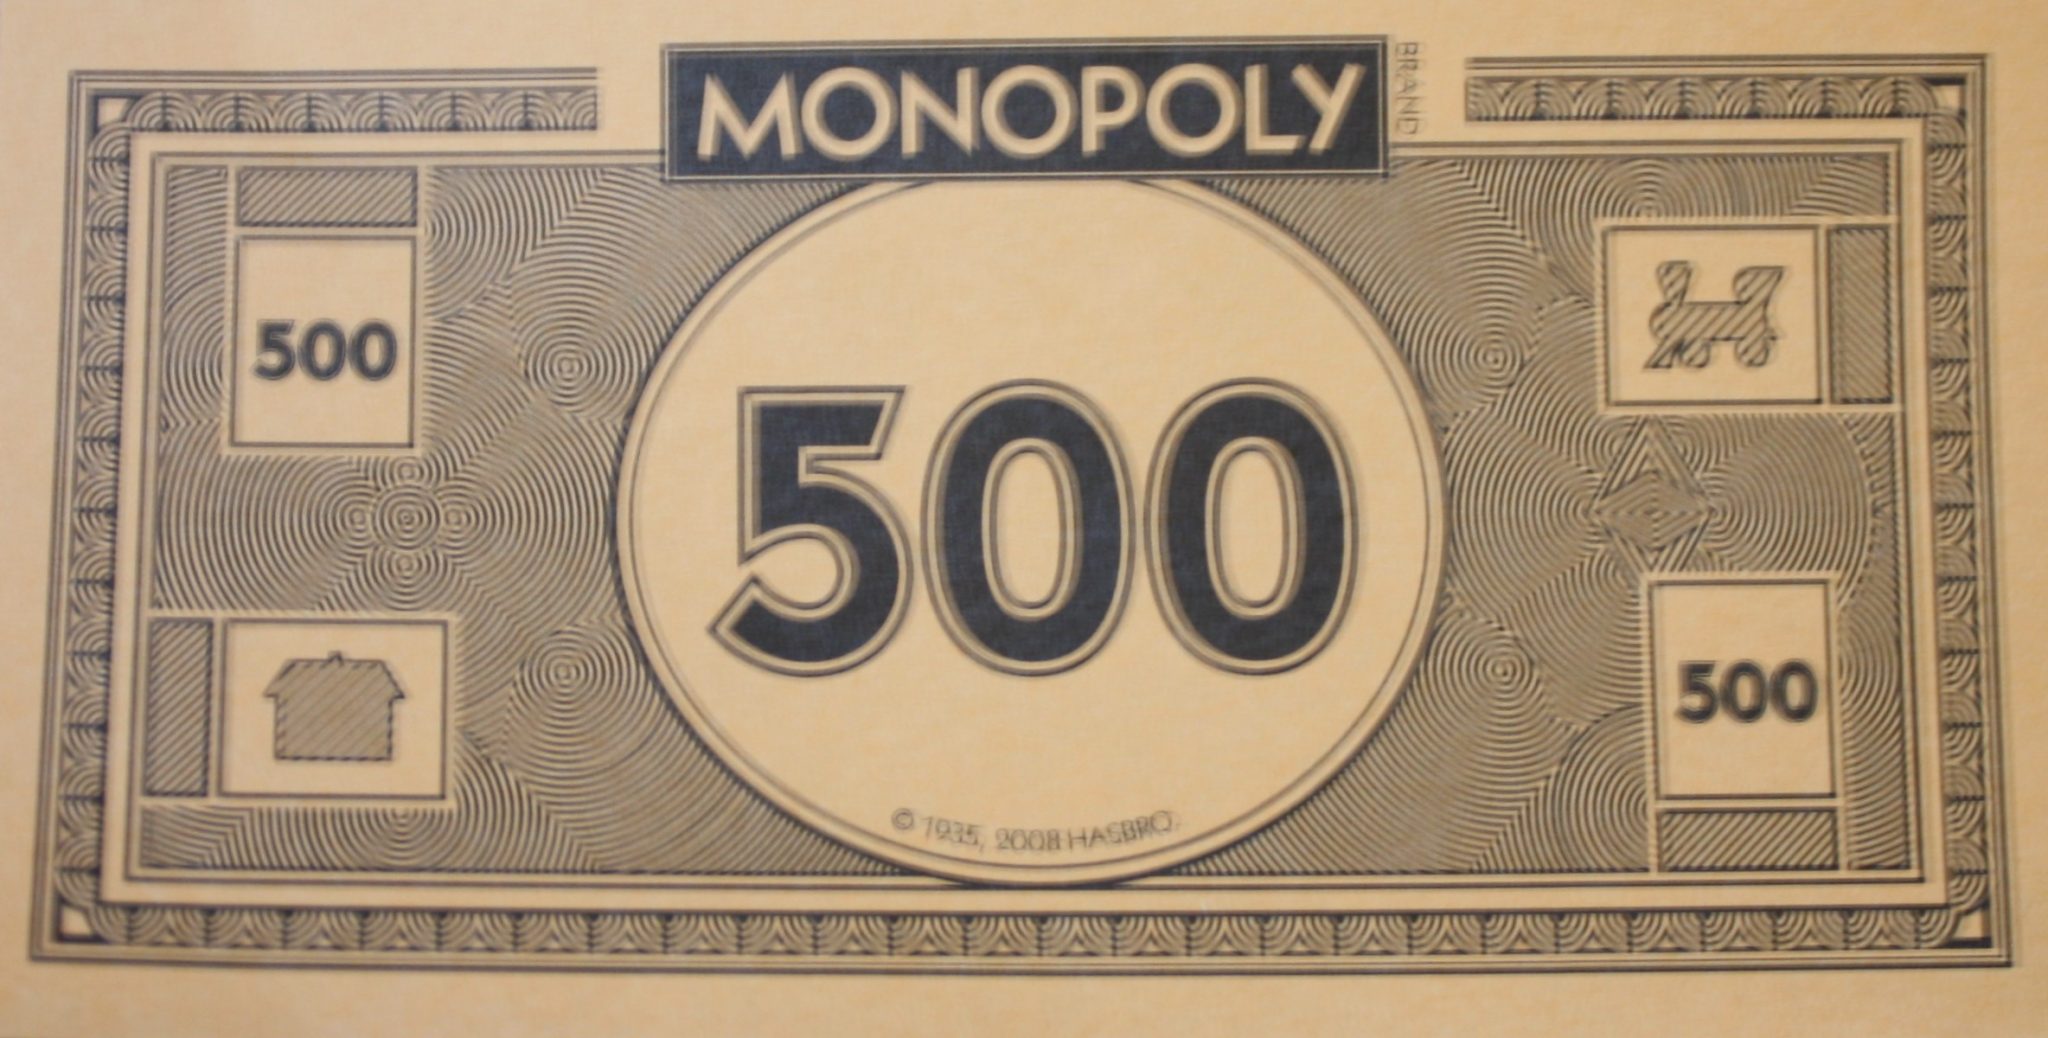 monopoly money in japanese